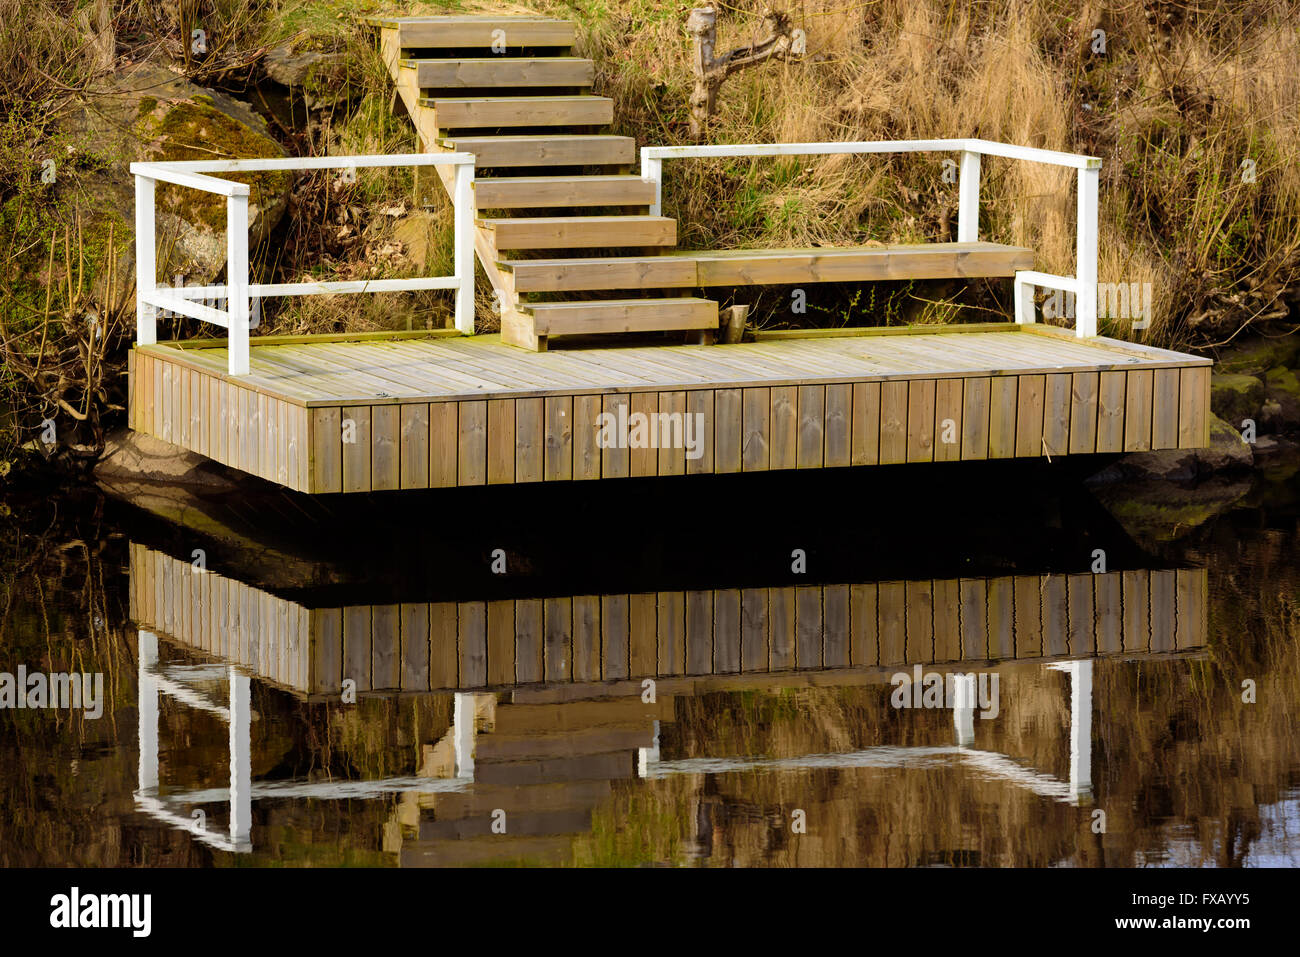 Hovering wooden jetty over still and motionless water. White railing and unpainted steps leading up from the jetty. Stock Photo